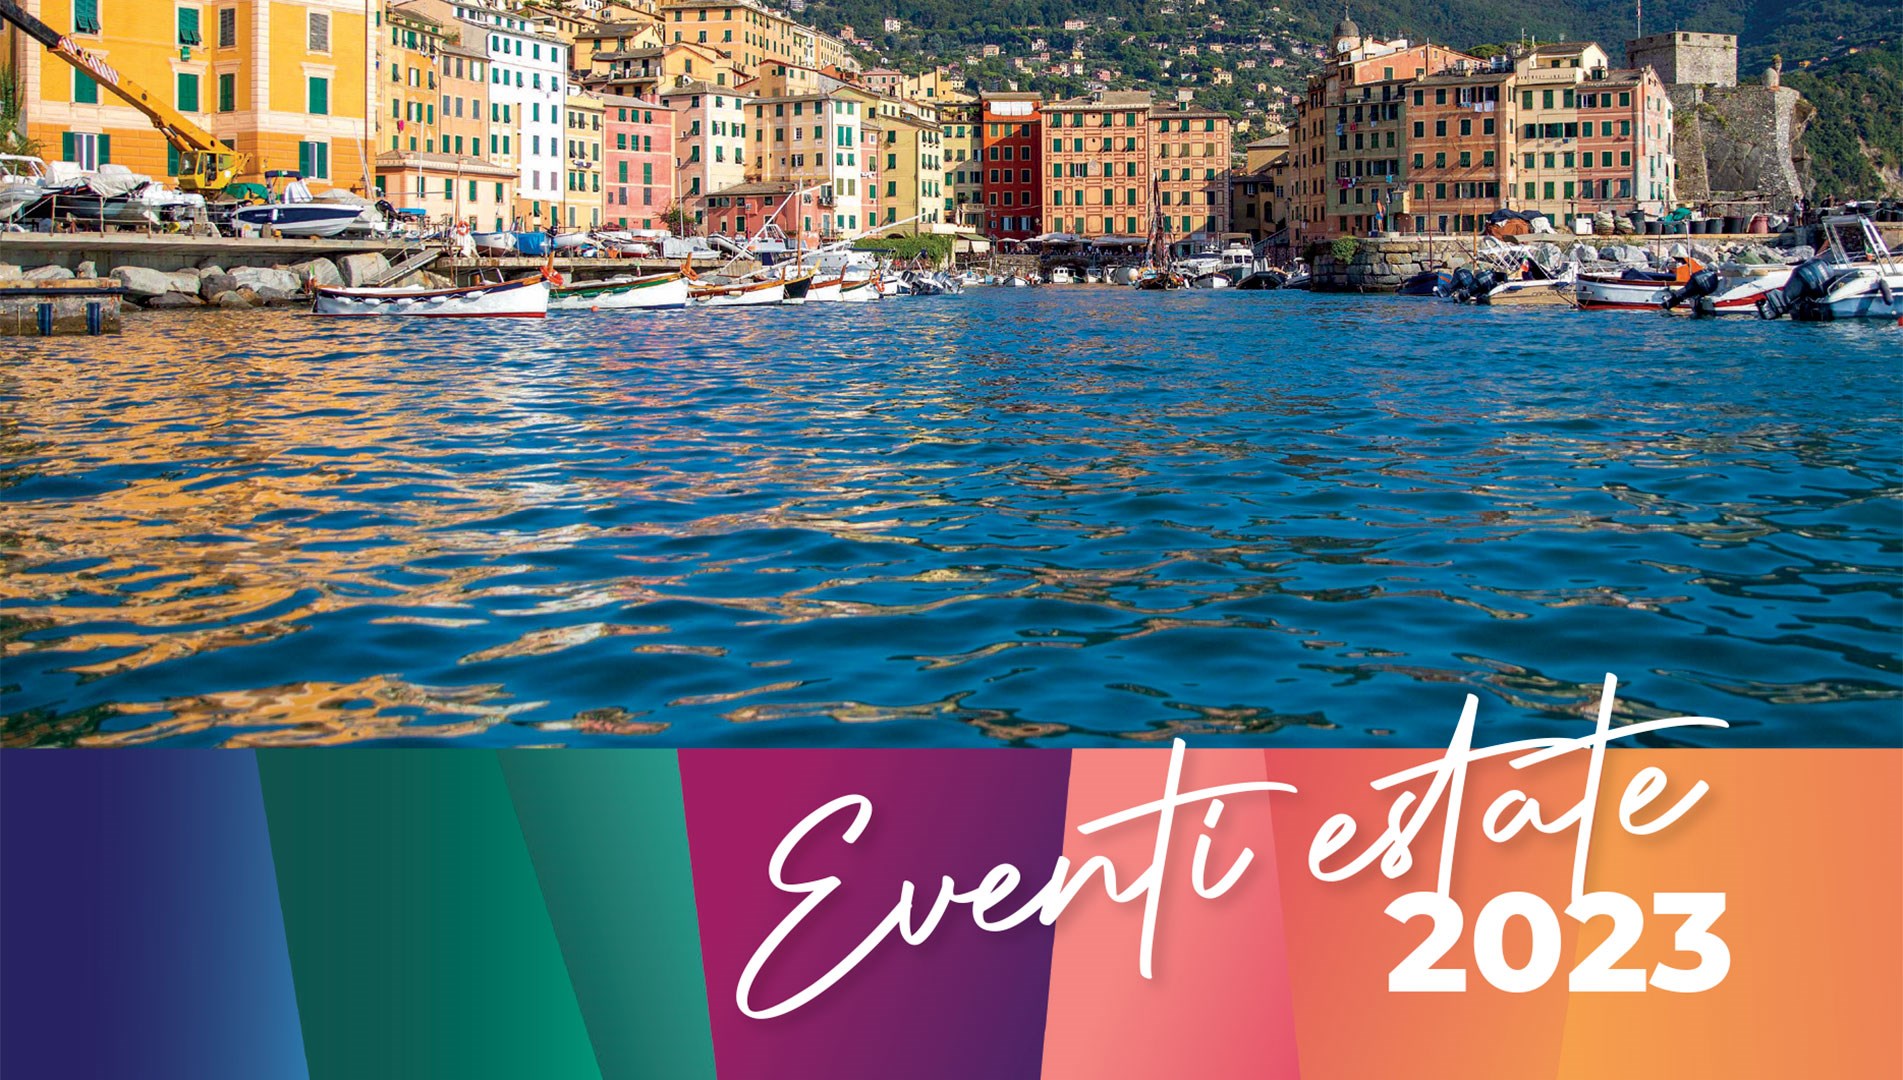 Events in Camogli for summer 2023